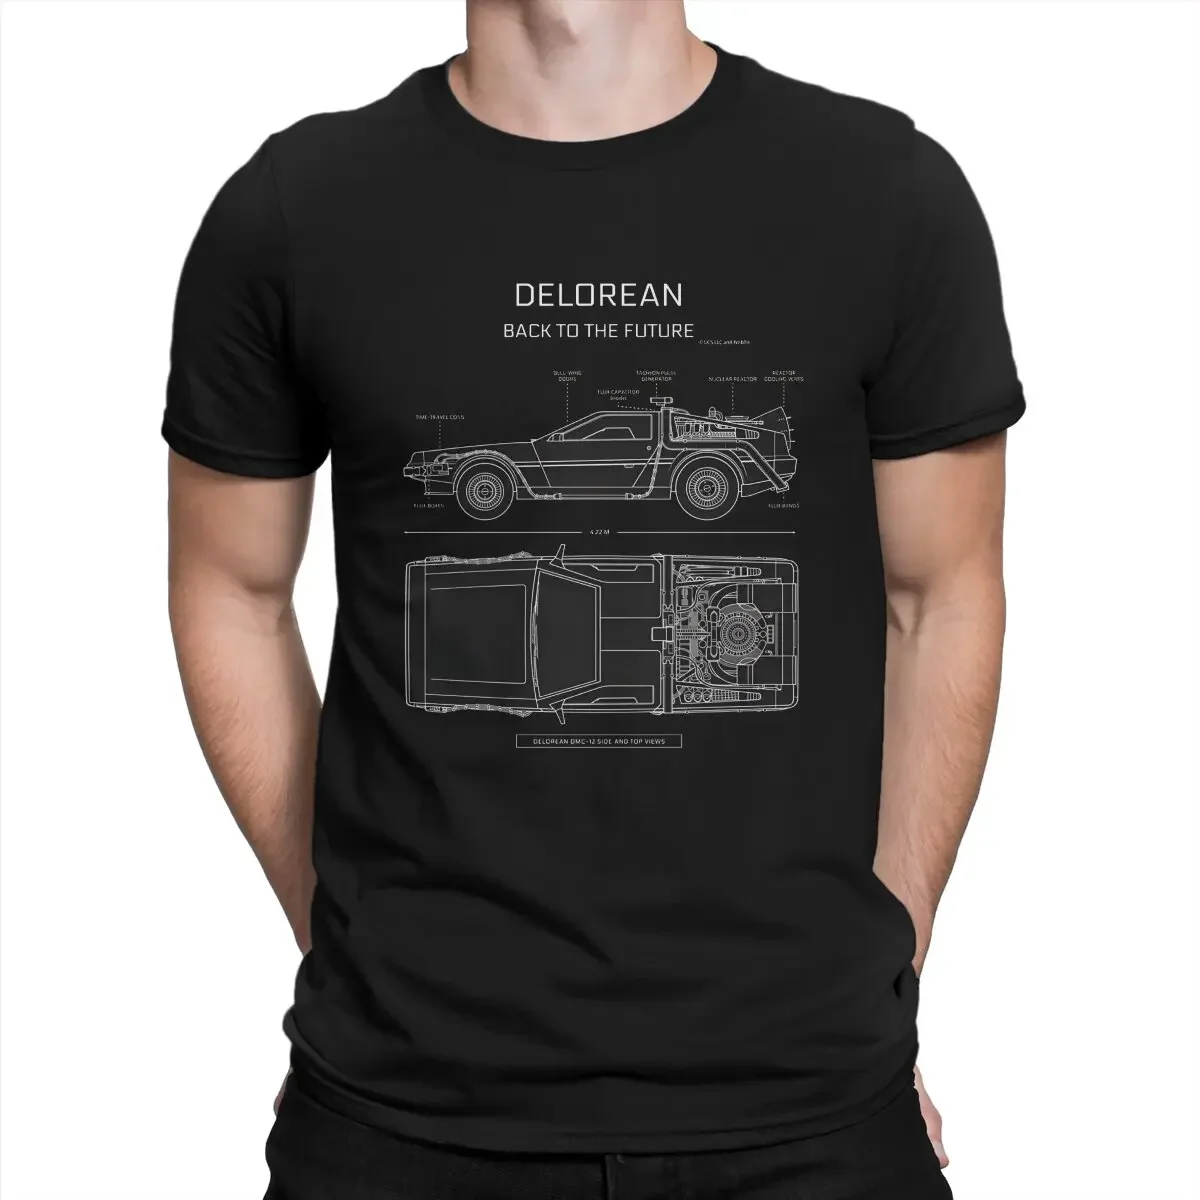 

Pure Cotton Tops Crazy Short Sleeve Round Collar Tee Shirt 6XL T-Shirt Men's Delorean Time Machine T Shirts Back To The Future